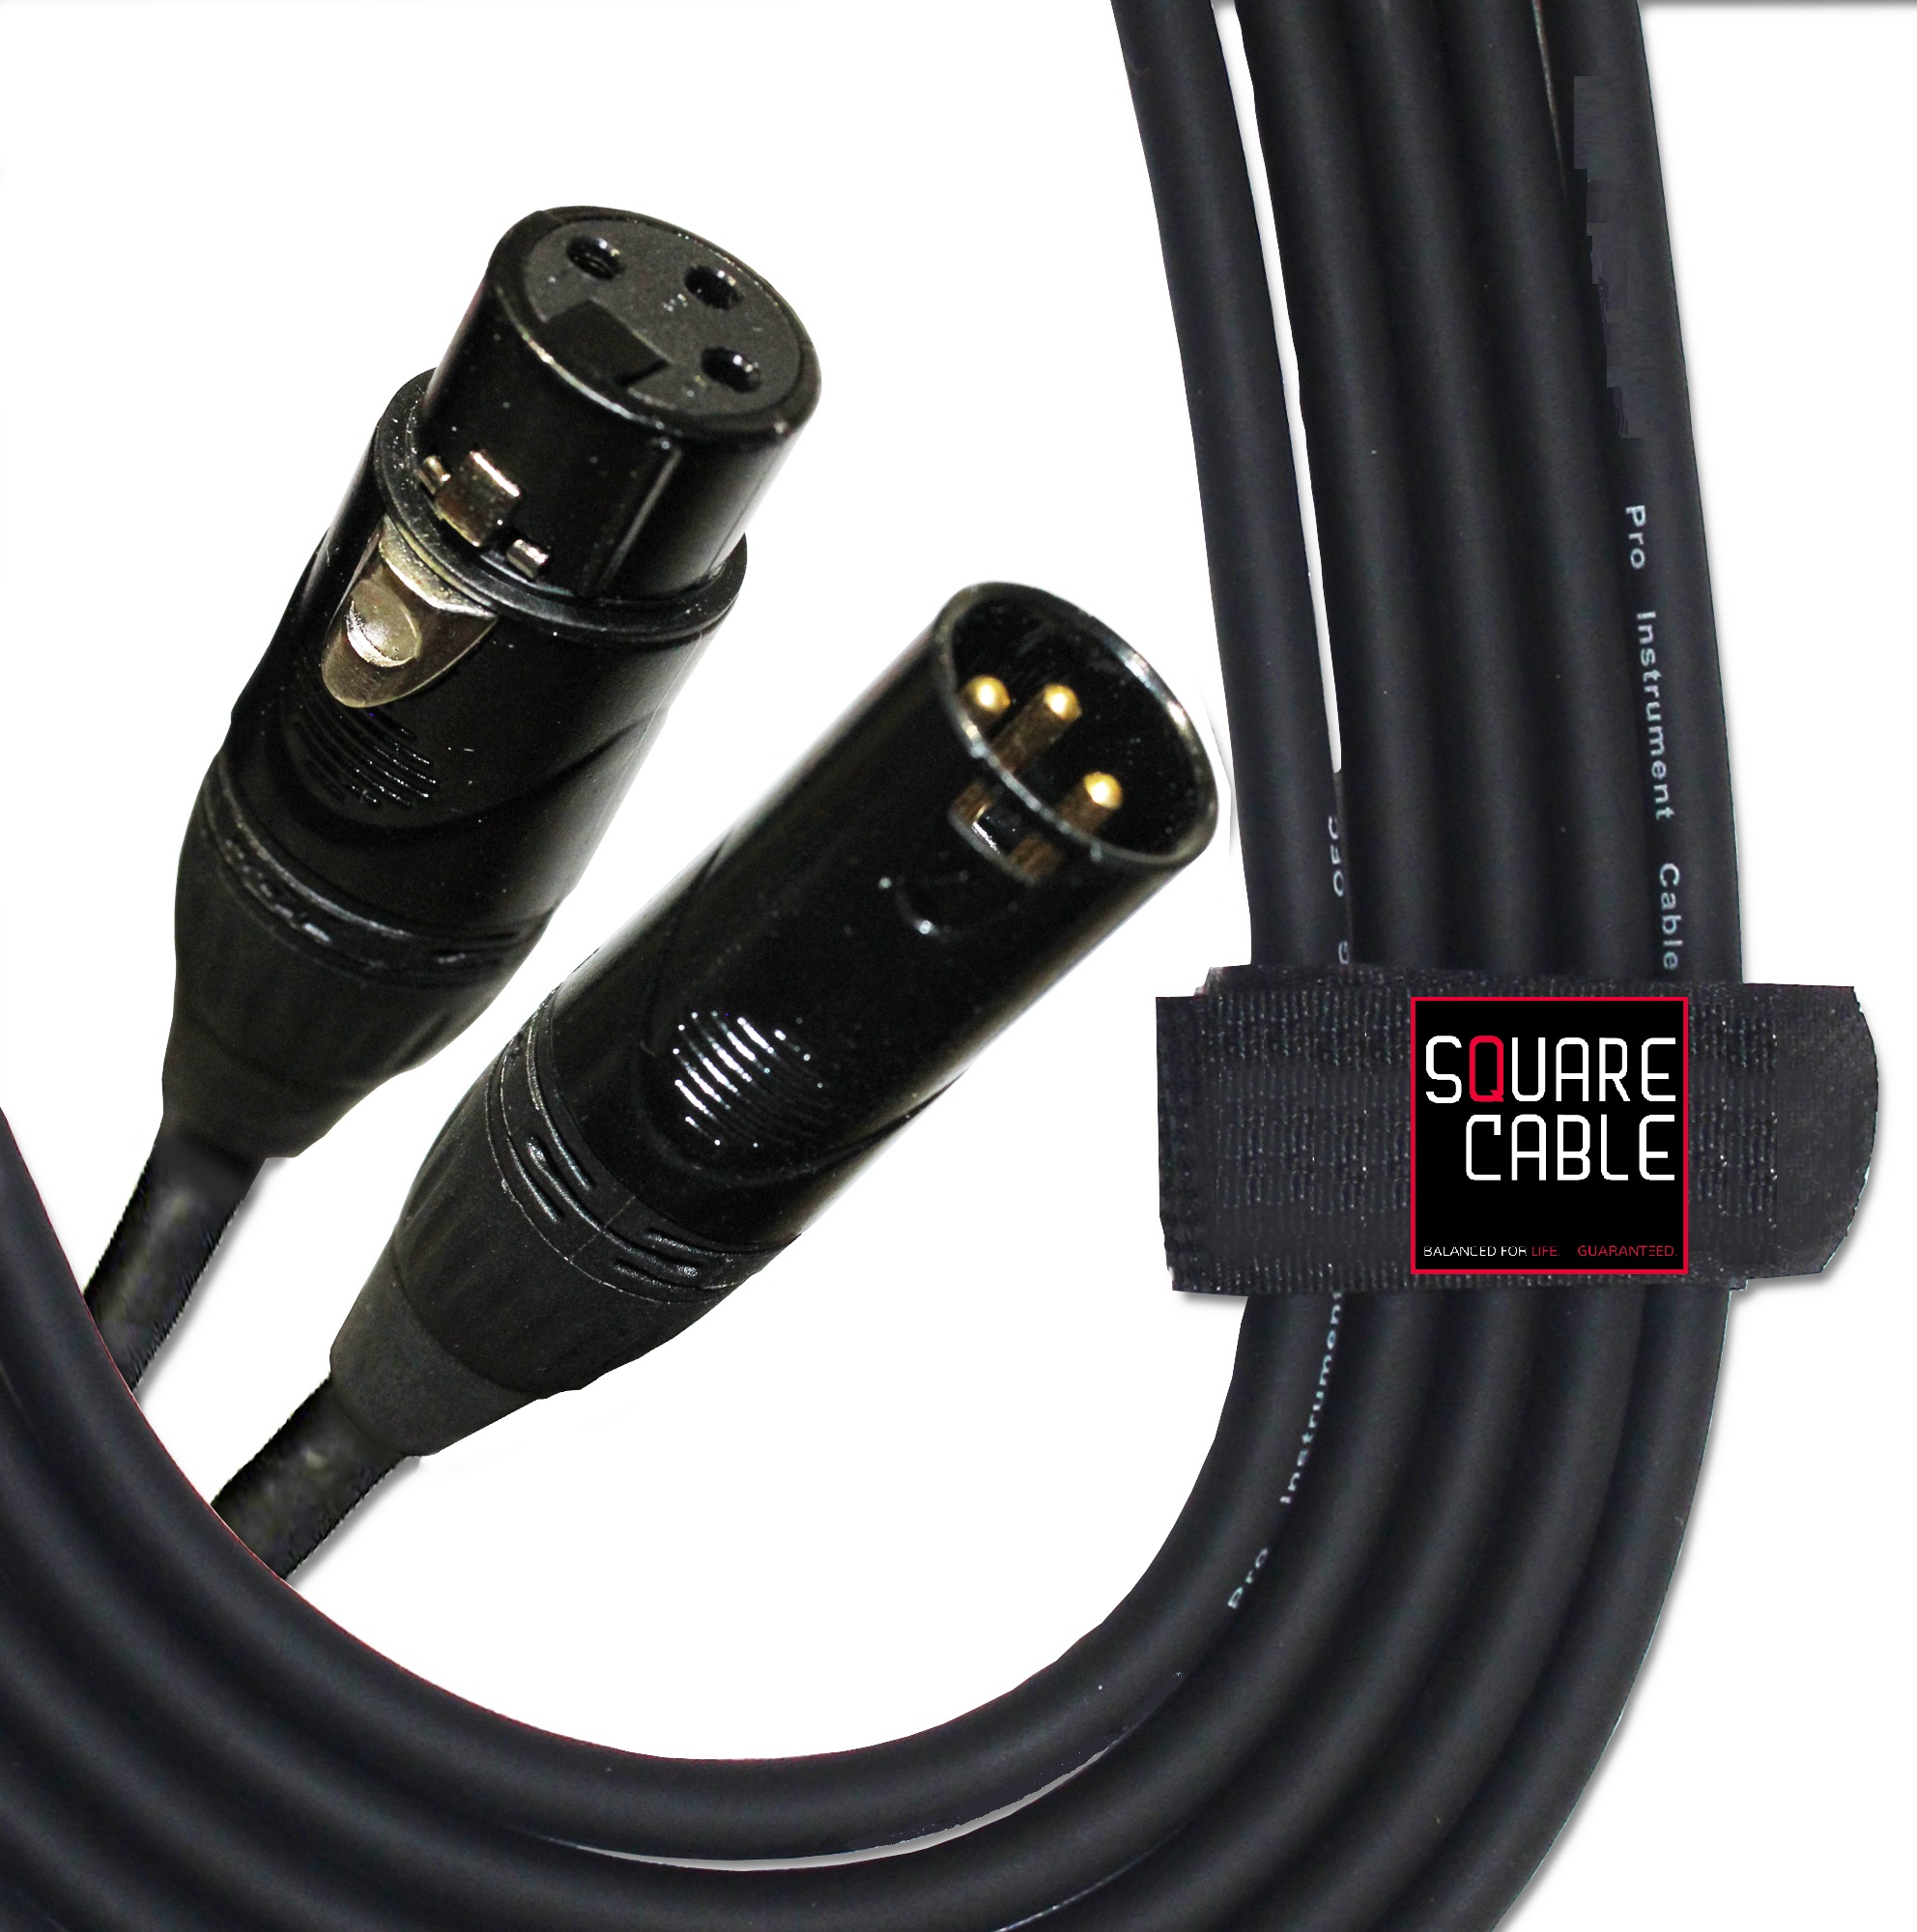 square-cable-dmx-50--50ft-dmx-cable-3-pin.jpg